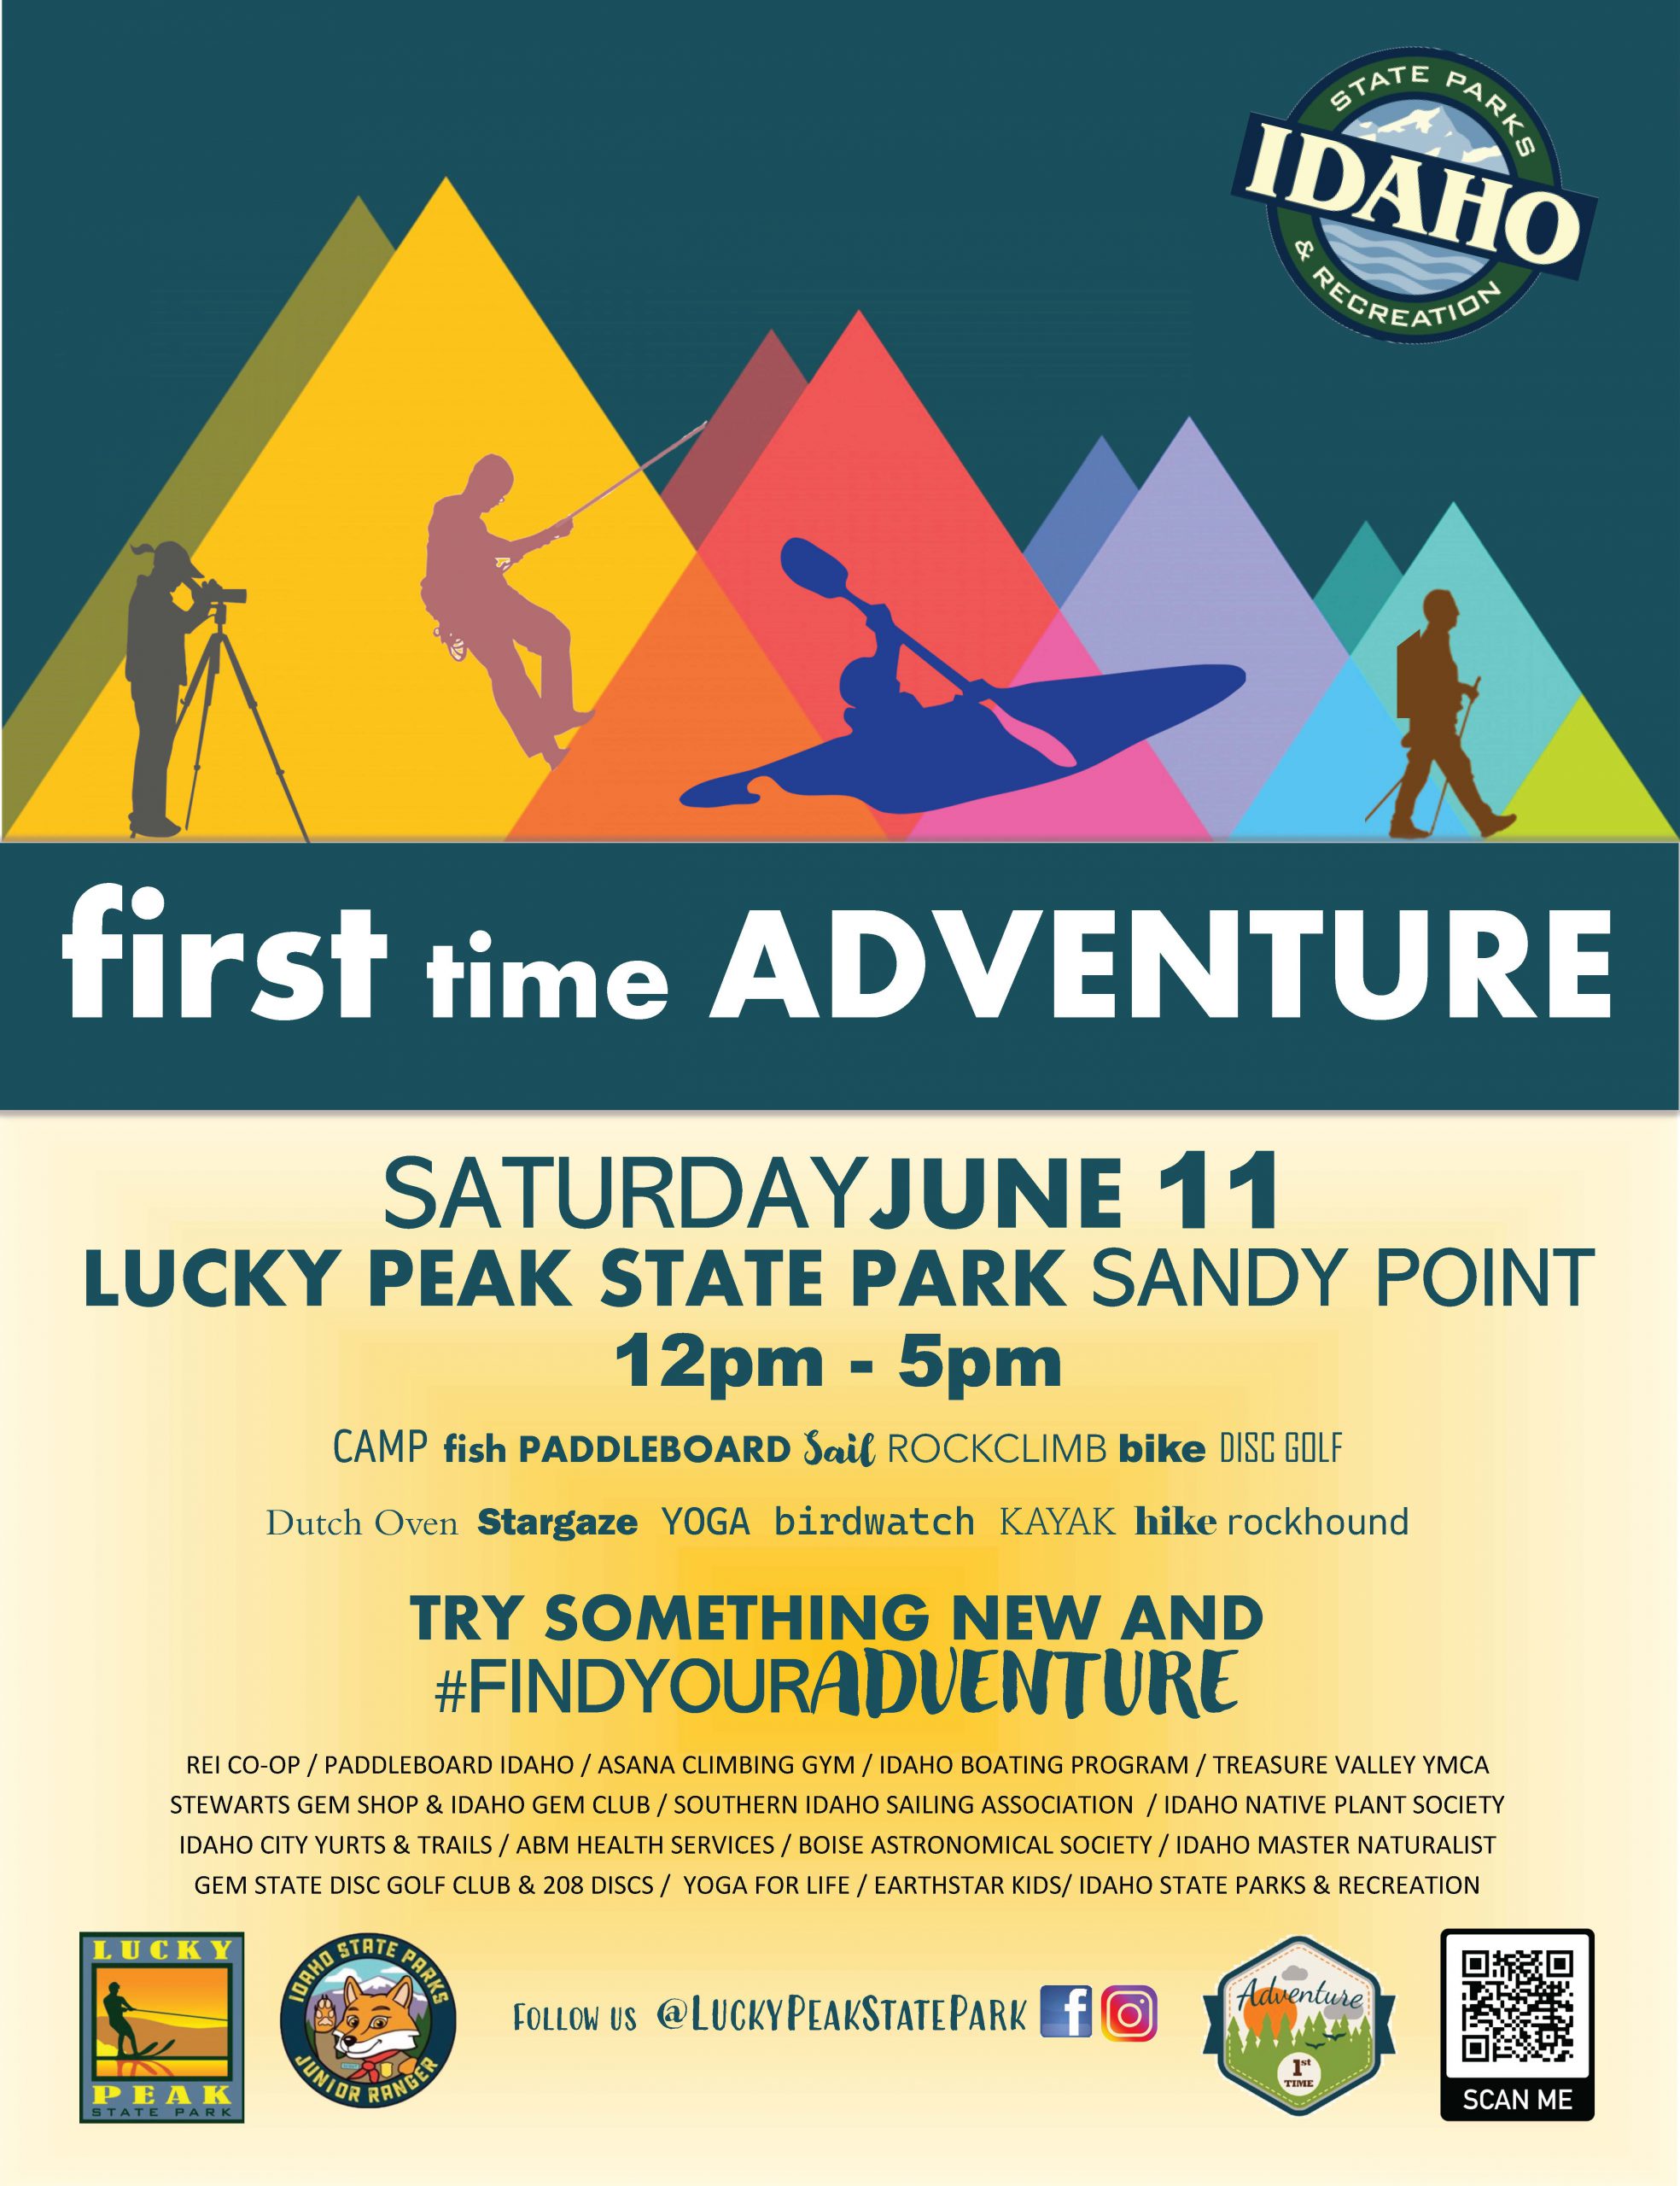 Held annually at Sandy Point Beach, this fair style event is your gateway to a new adventure! Lucky Peak State Park has partnered with vendors throughout the Treasure Valley to showcase all the outdoor opportunities Idaho has to offer. Learn about local hiking club, citizen science & volunteer projects. Learn how to paddleboard, go birding, go fishing, operate a telescope and so much more. You want to try camping but not sure where to start or what you actually need? We've got you covered! Whether its your first adventure or your hundredth, join us for a fun-filled day out at the park!